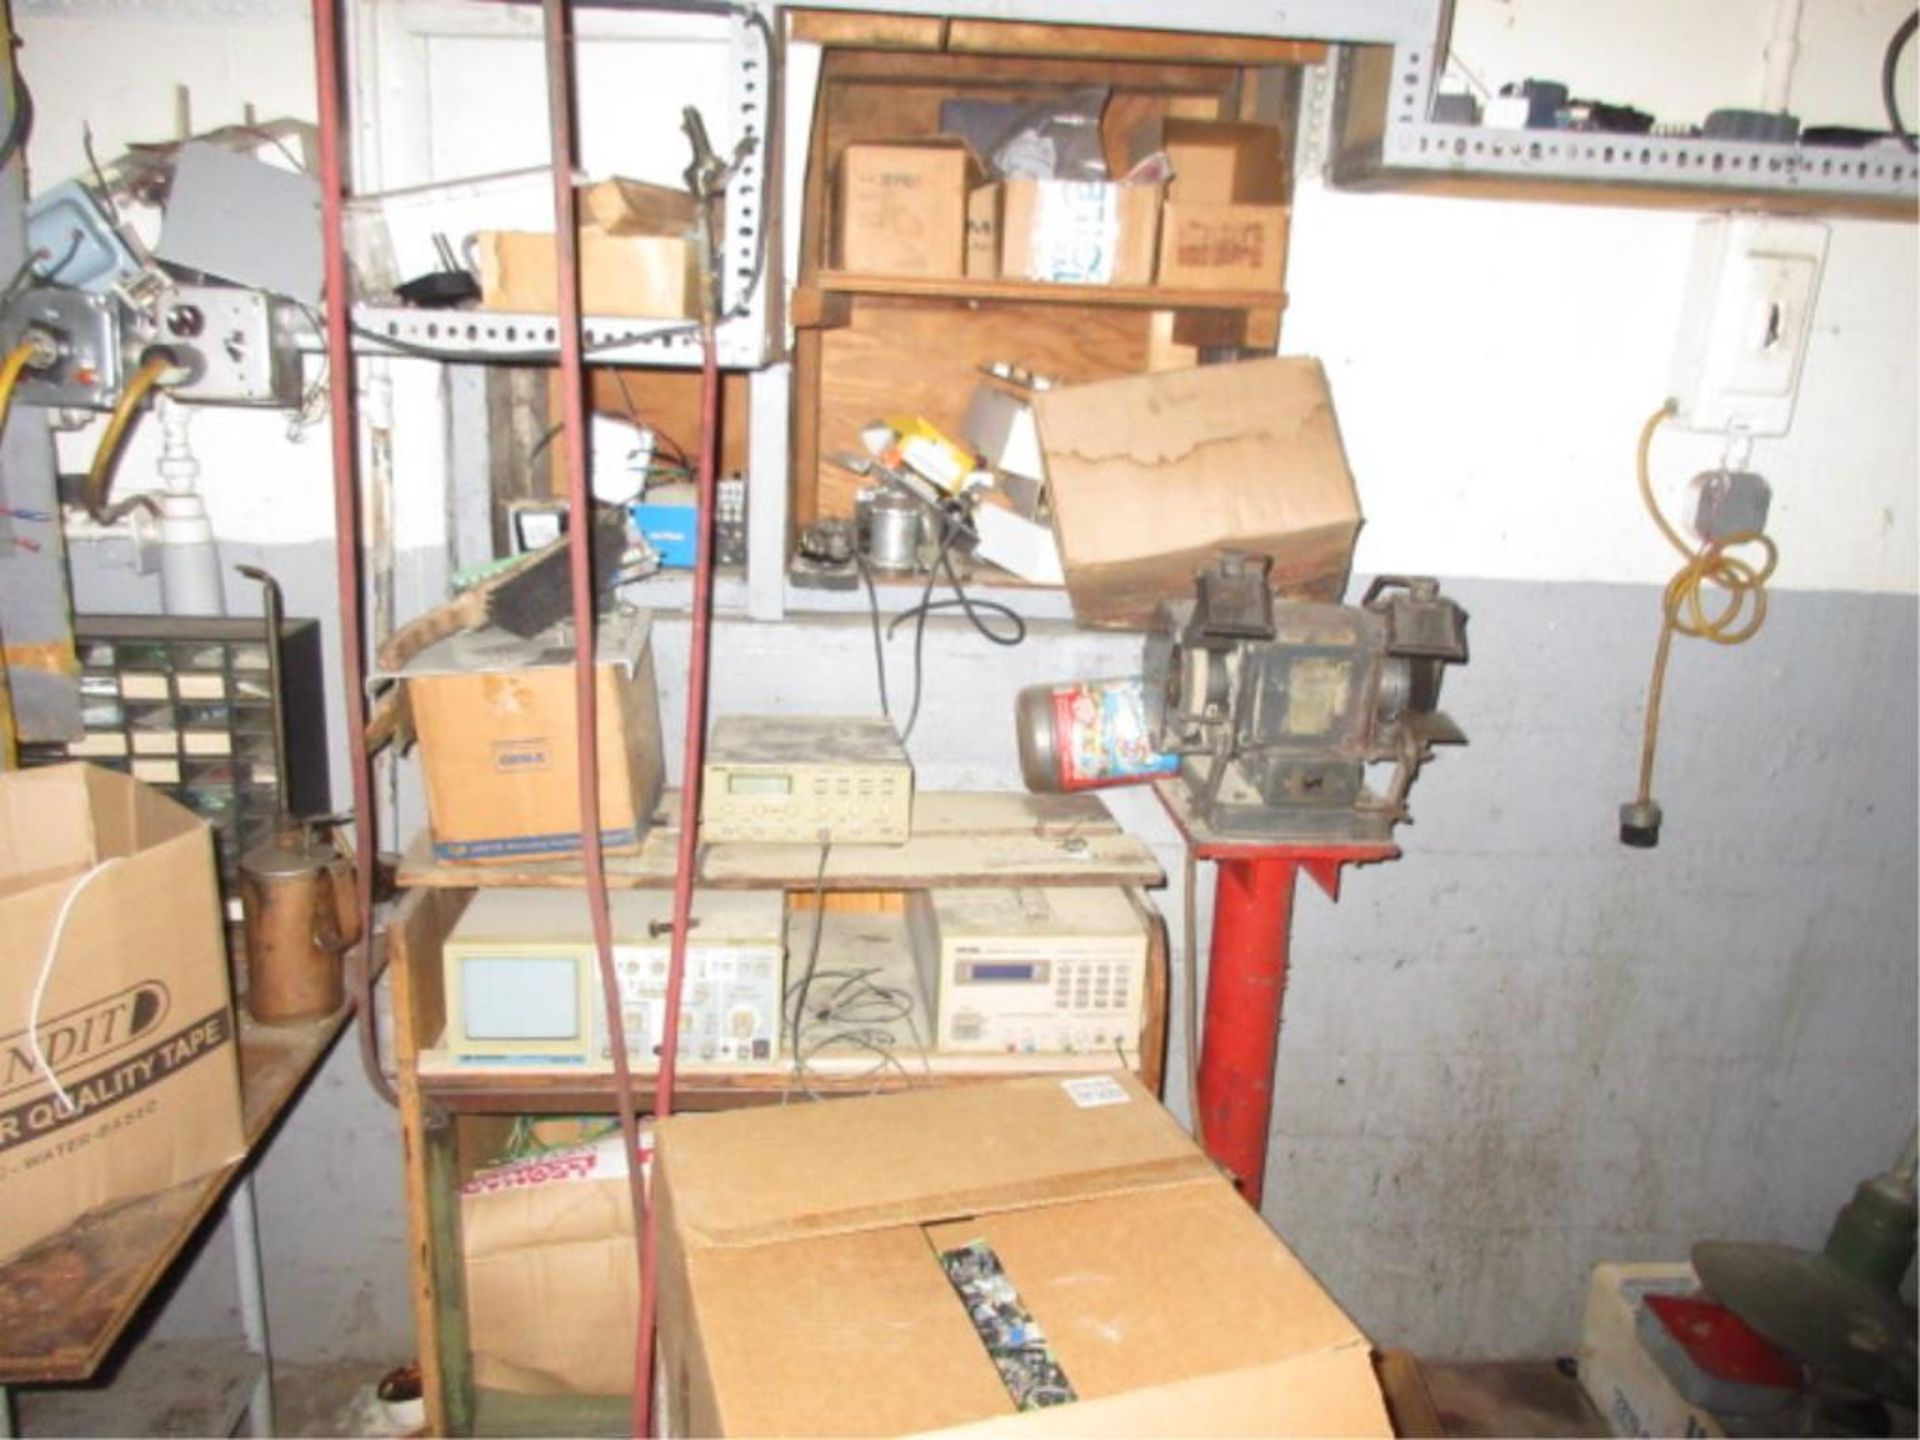 Lot Contents of Electrical Shop, includes cabinets, contents, conduit, etc. in three rooms. - Image 13 of 17